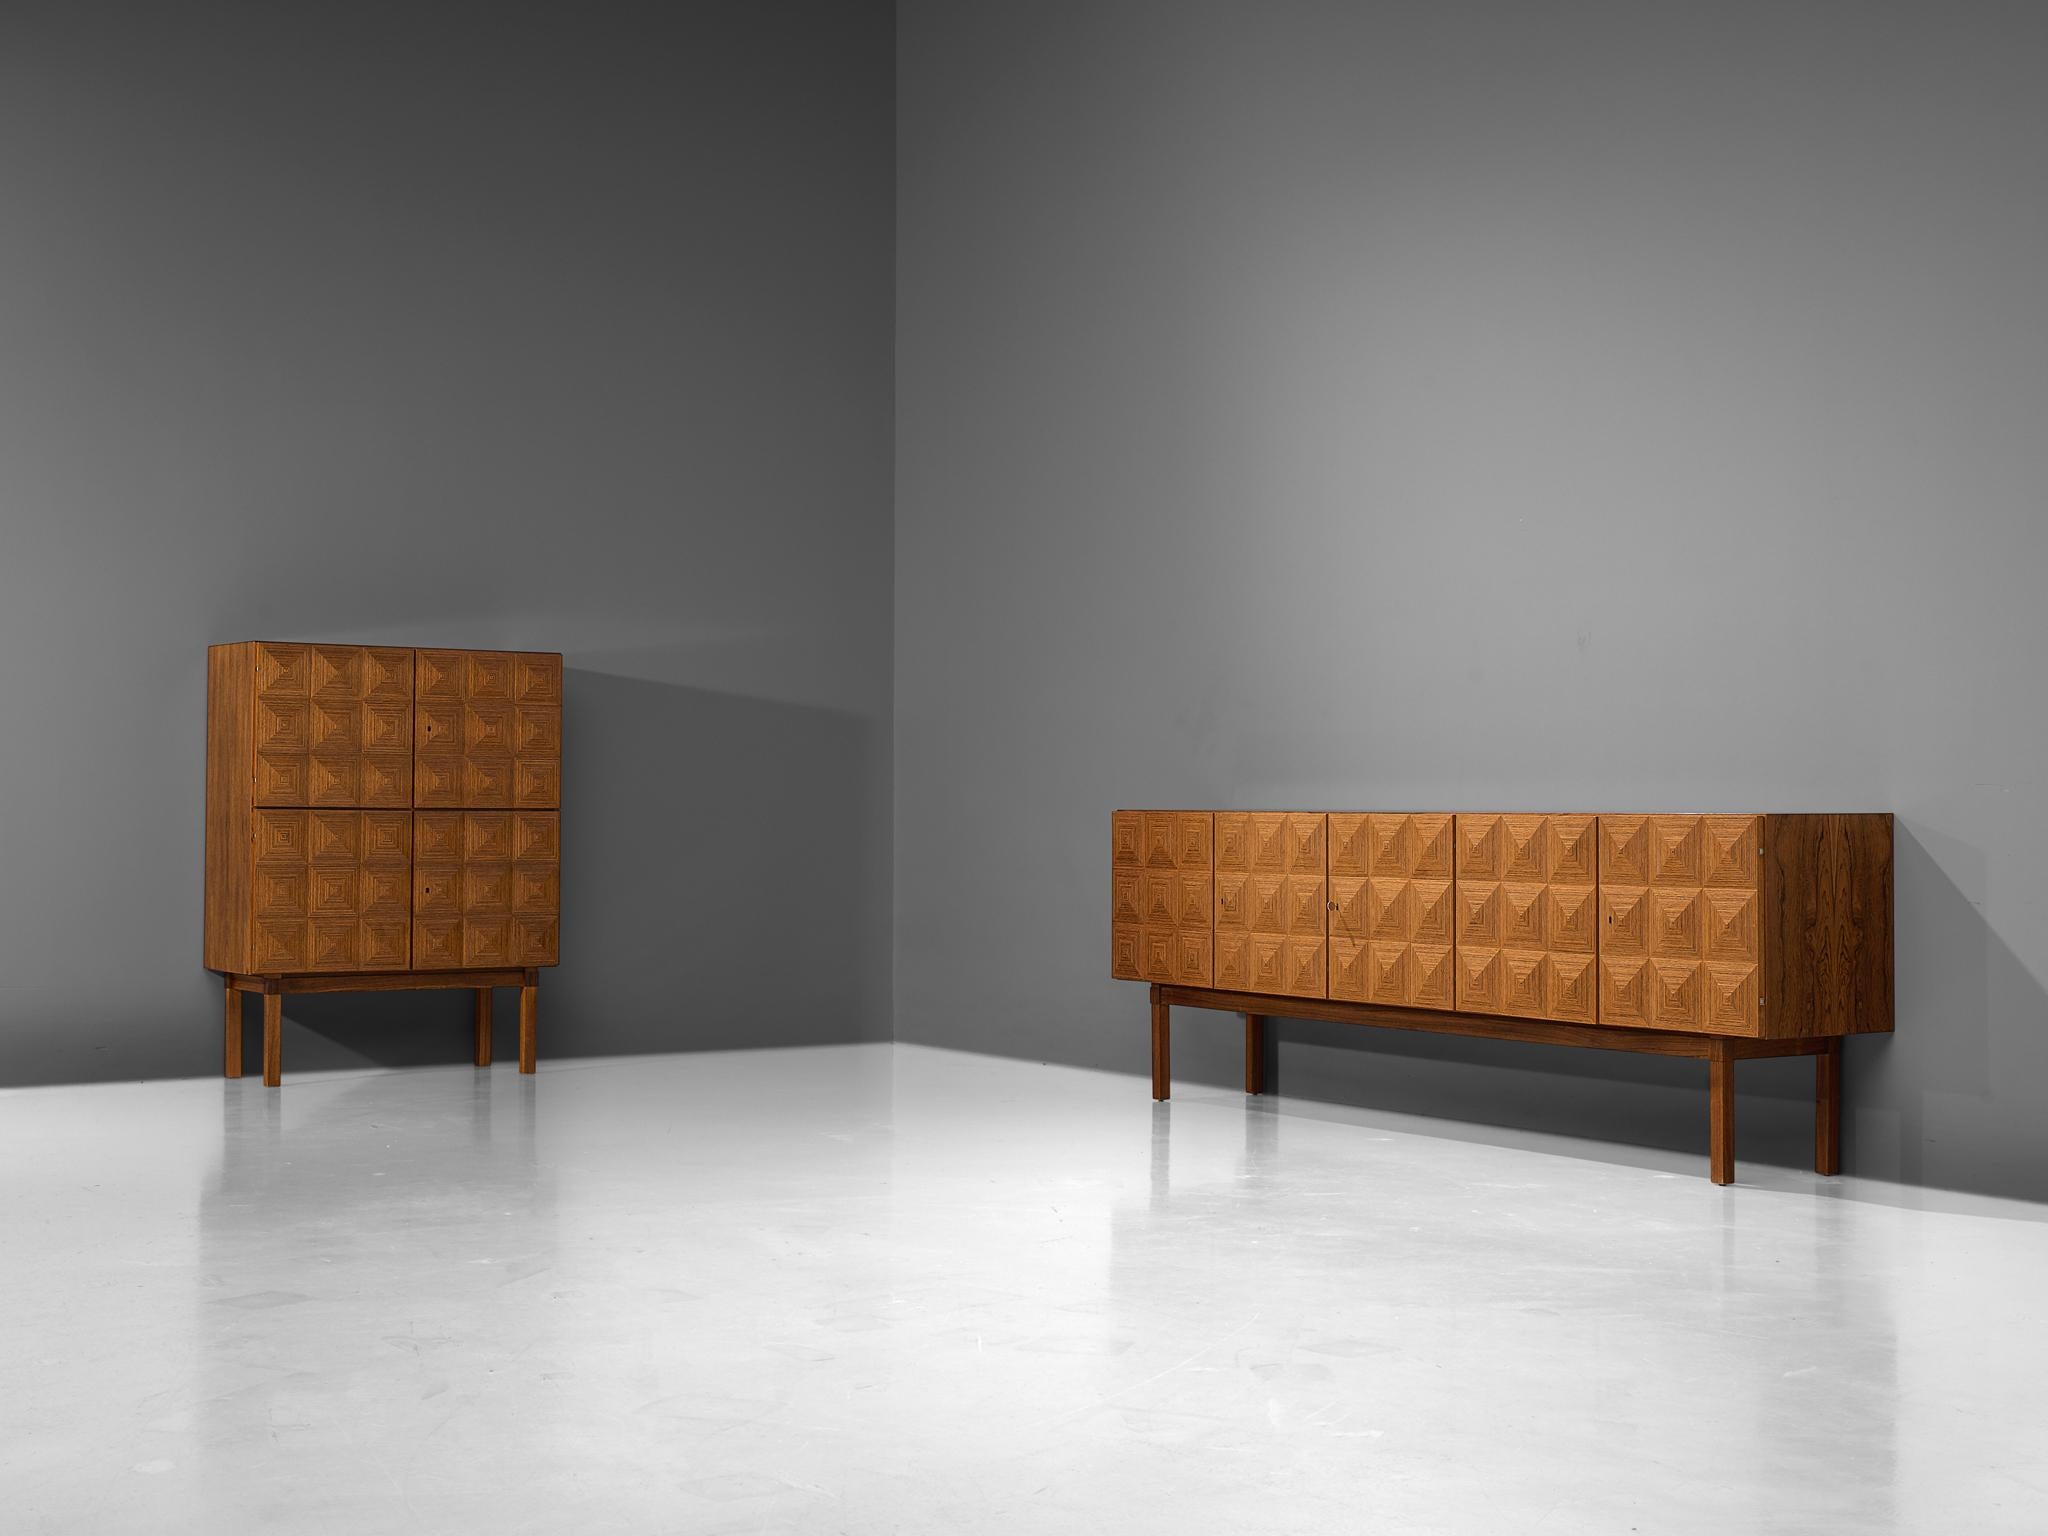 Franz Meyer, set of highboard and sideboard, rosewood, Germany, 1960s

Subtle ‘brutal looking’ highboard and sideboard by master furniture maker Franz Meyer from the 1960s. The doors of these cabinets feature a diamond-shaped structure, which